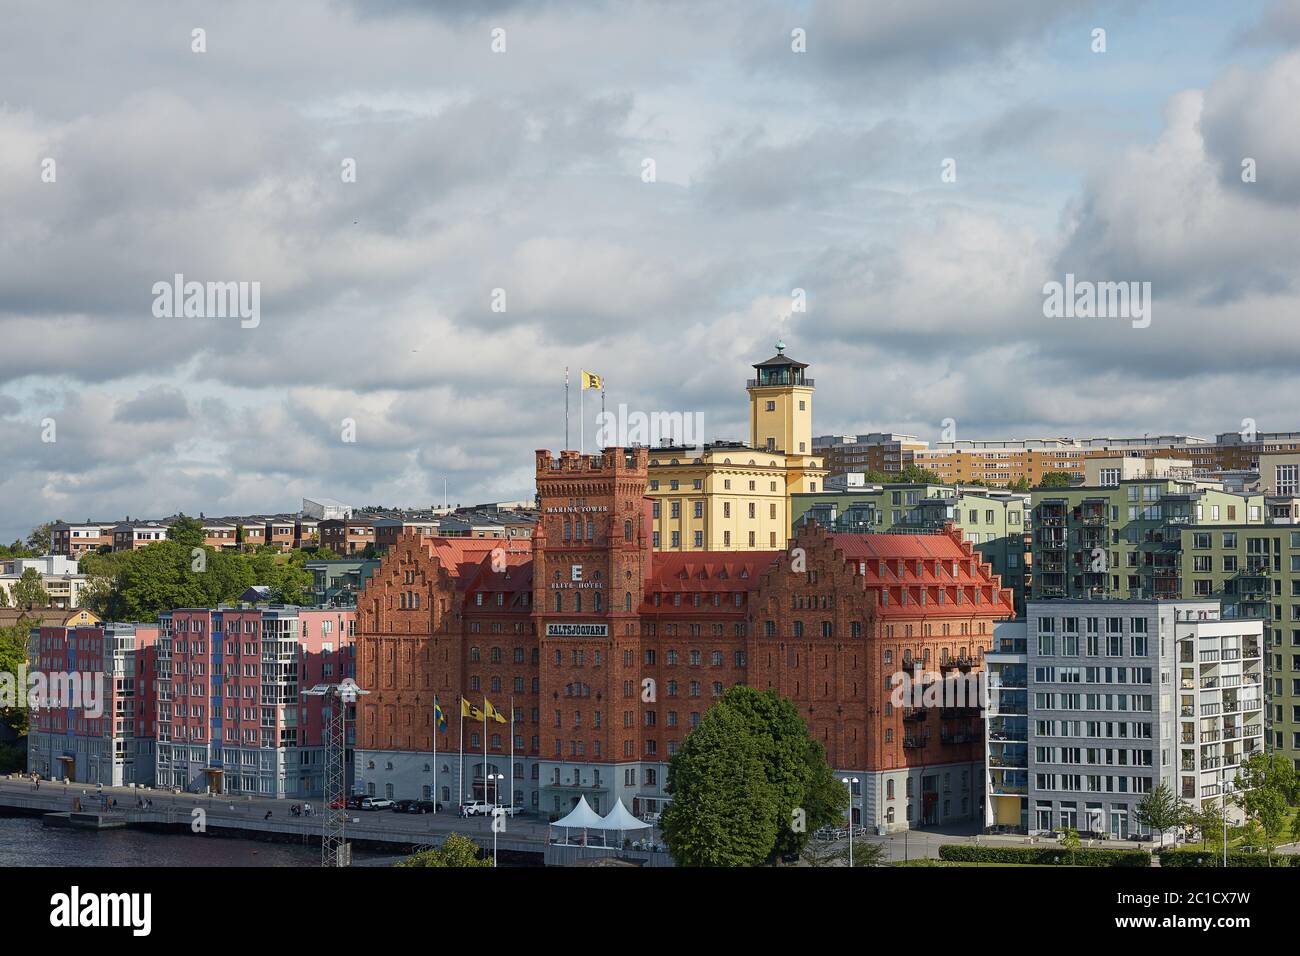 View of Elite Hotel Marina Tower near city center of the Swedish capital Stockholm Sweden Stock Photo